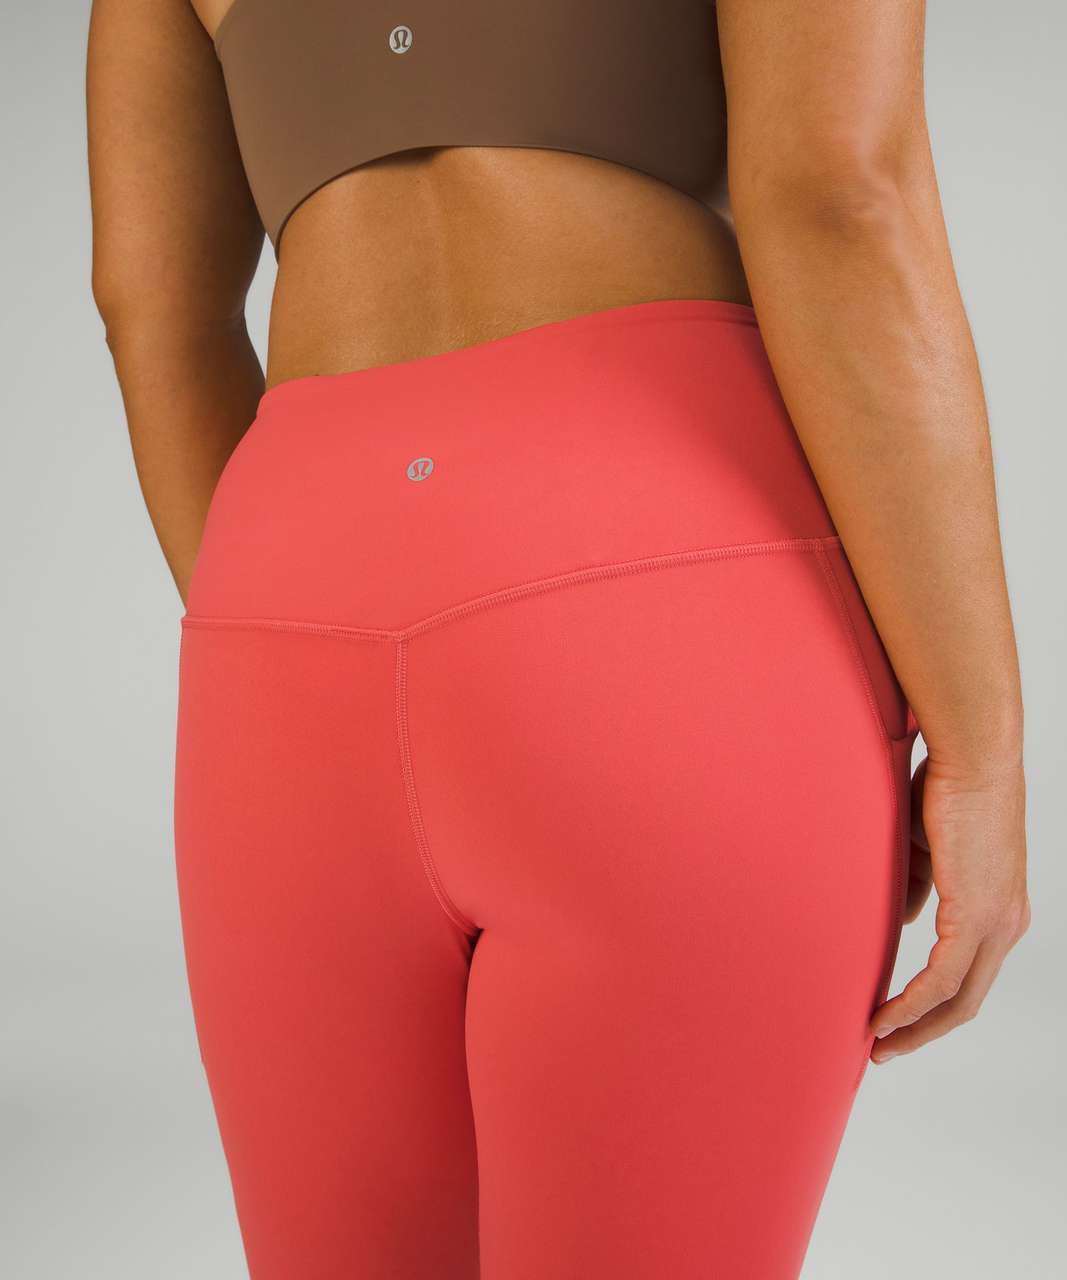 Lululemon Align High-Rise Crop with Pockets 23" - Pale Raspberry